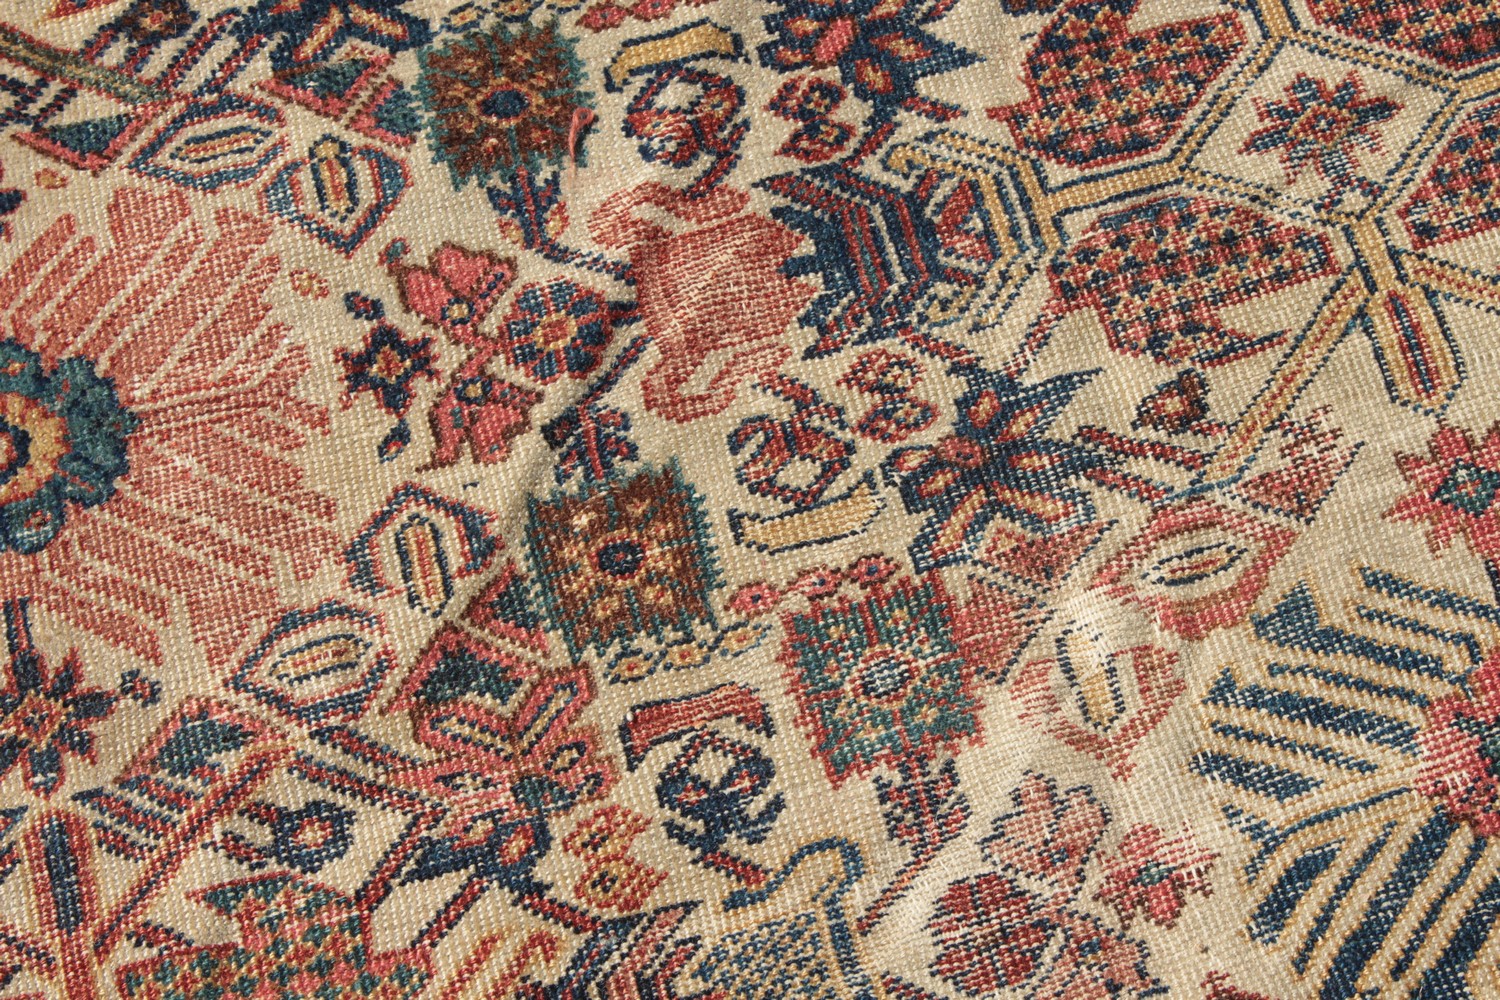 A VERY LARGE PERSIAN MAHAL CARPET. 15ft x 10ft 6ins. - Image 8 of 17